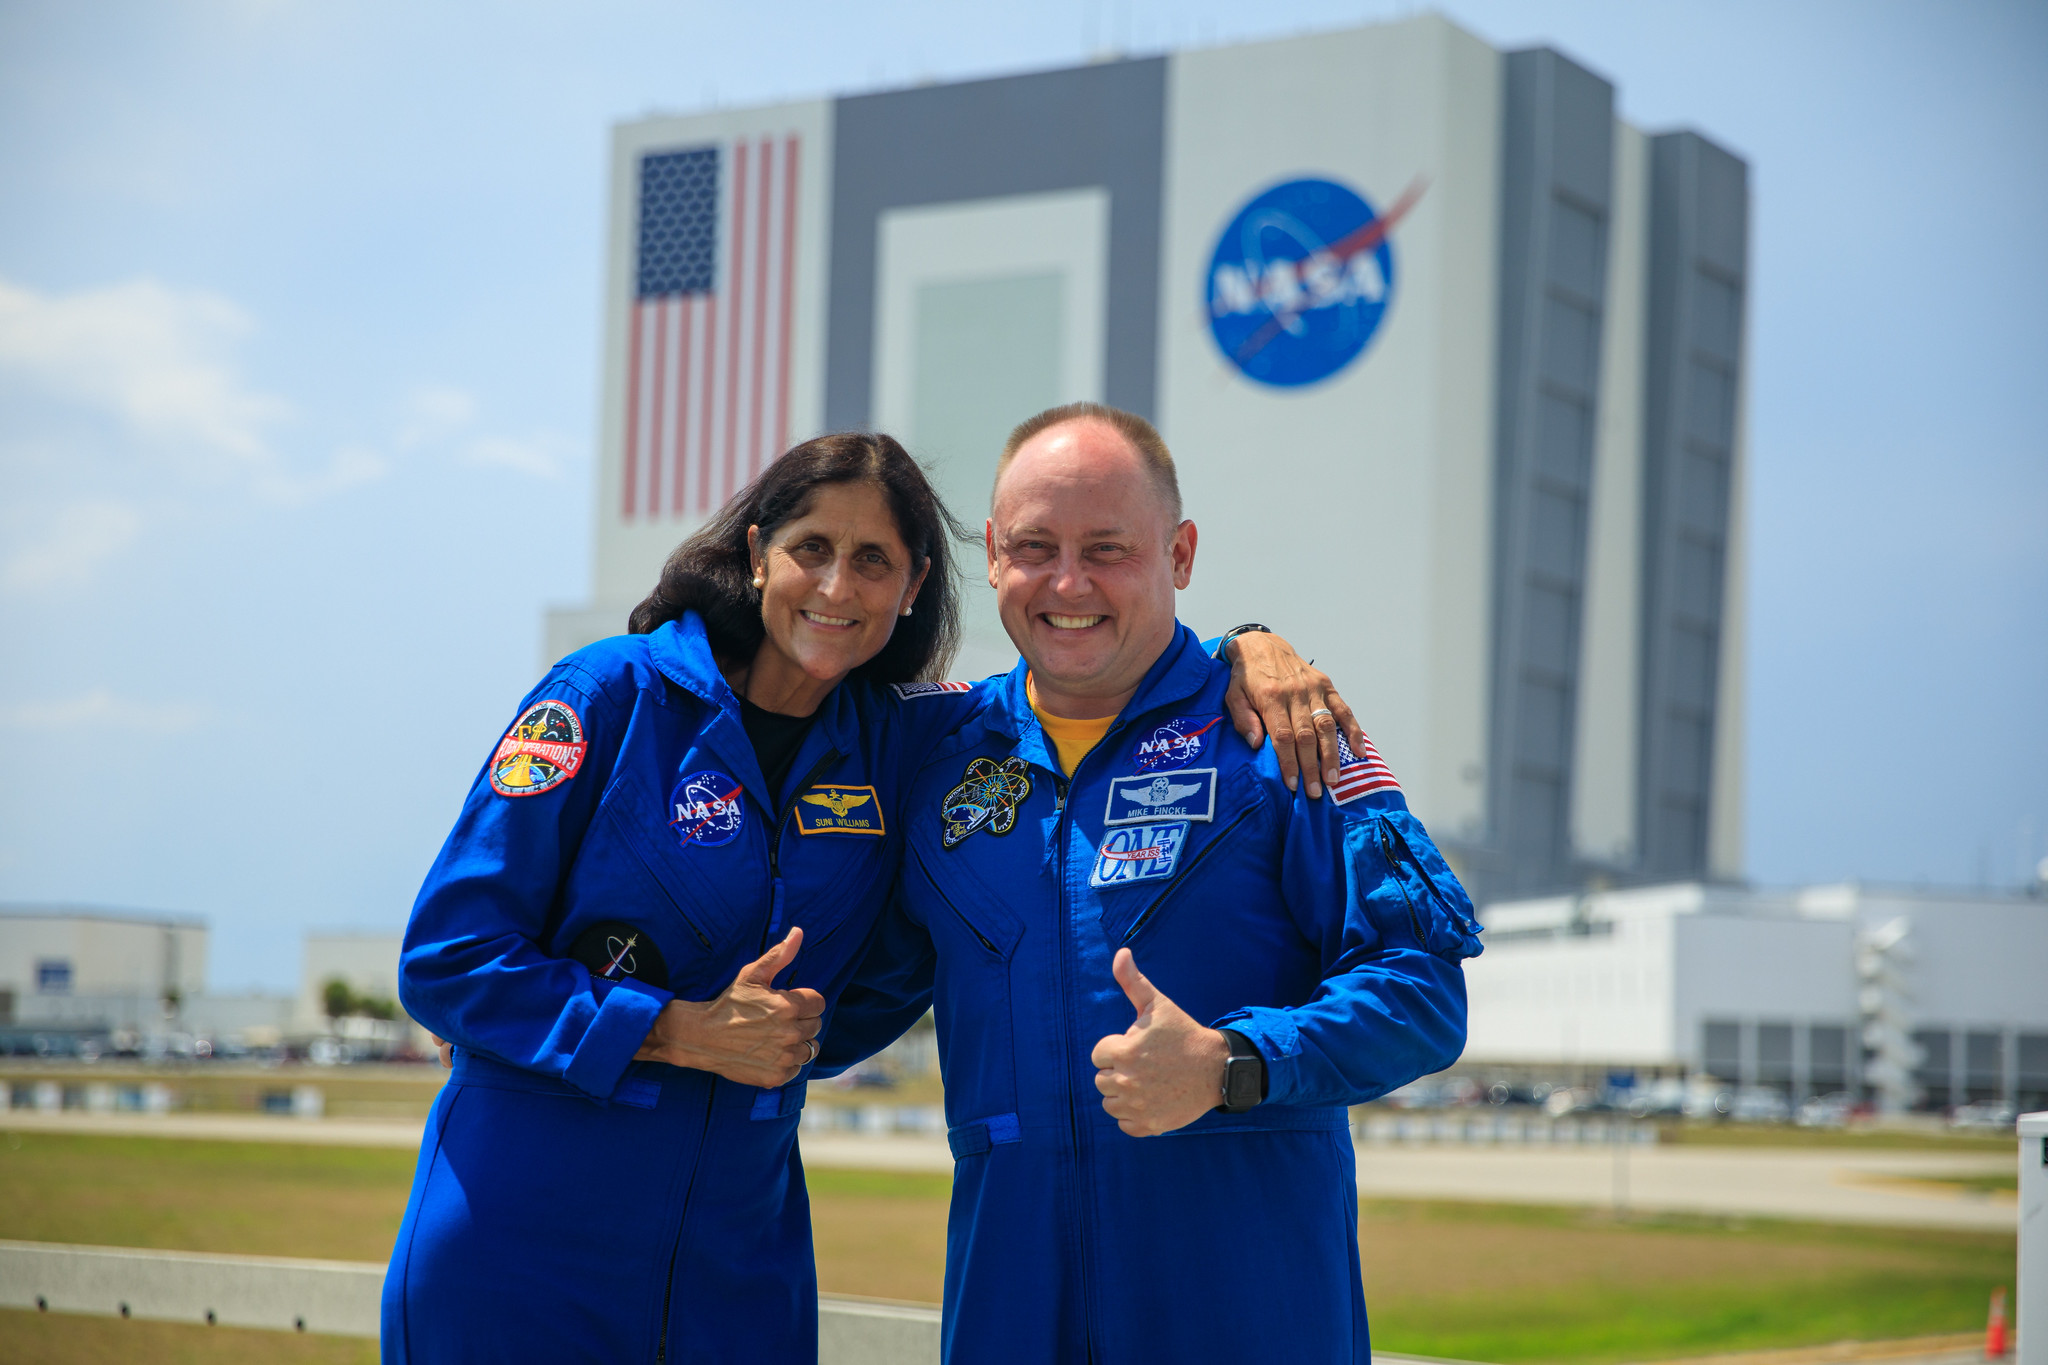 NASA astronauts Suni Williams, left, and Mike Fincke, right, pose for photographs while visiting NASA’s Kennedy Space Center in Florida, May 18, 2022, in advance of the agency’s Boeing Orbital Flight Test-2 (OFT-2) for NASA’s Commercial Crew Program. Boeing’s CST-100 Starliner spacecraft will launch atop a United Launch Alliance Atlas V rocket from Space Launch Complex-41 at Cape Canaveral Space Force Station on May 19, 2022.